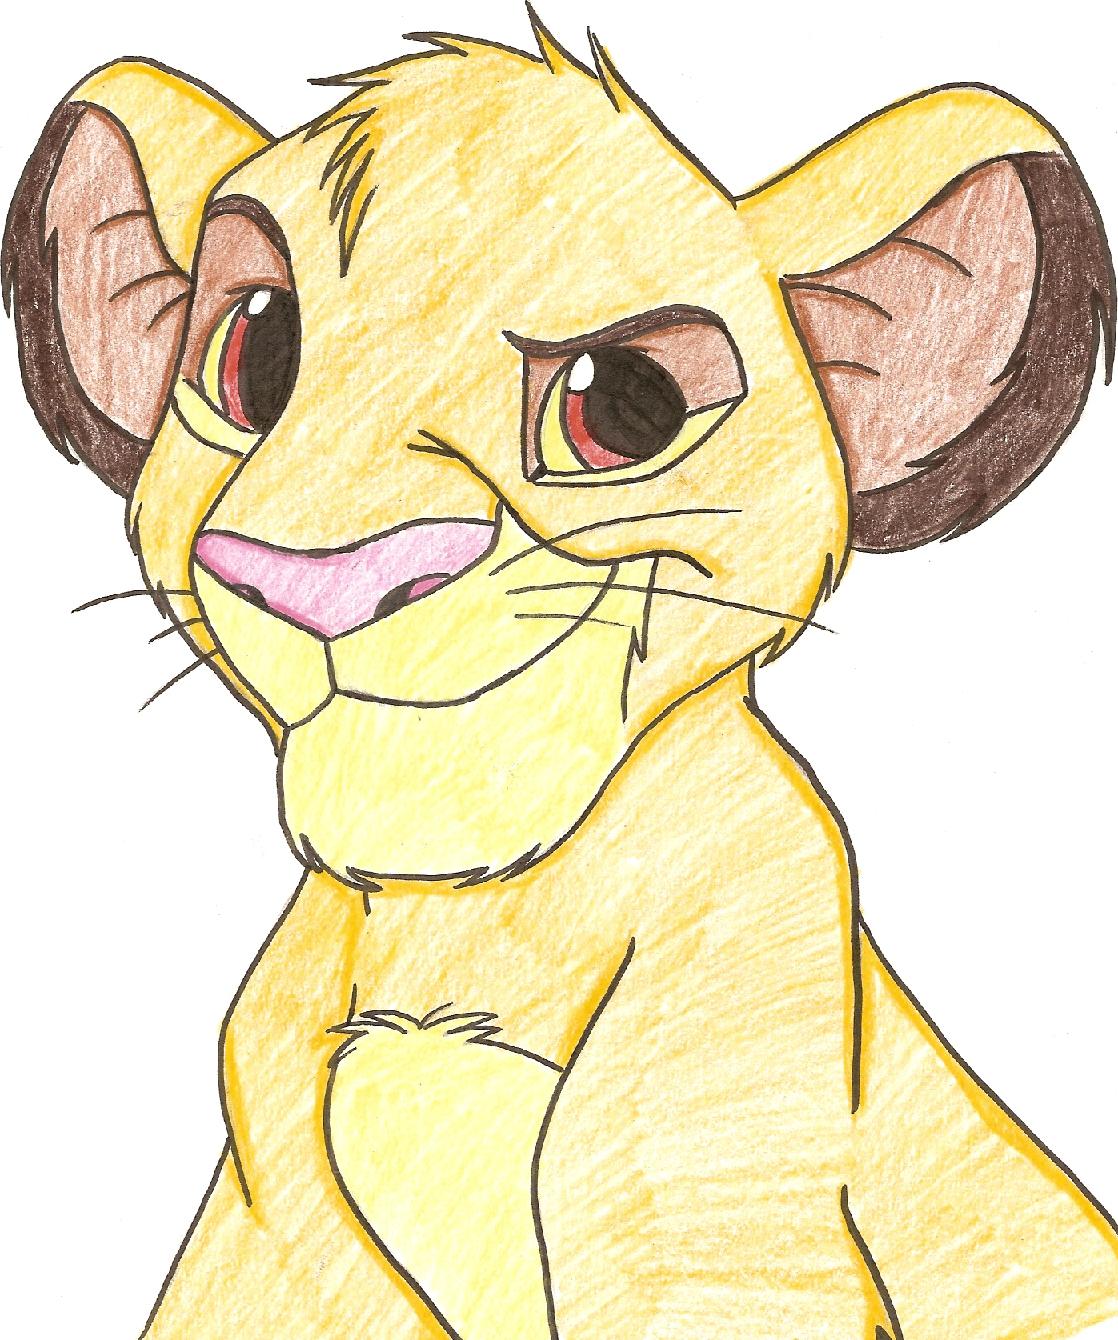 Simba with a cute expression by kittysan5